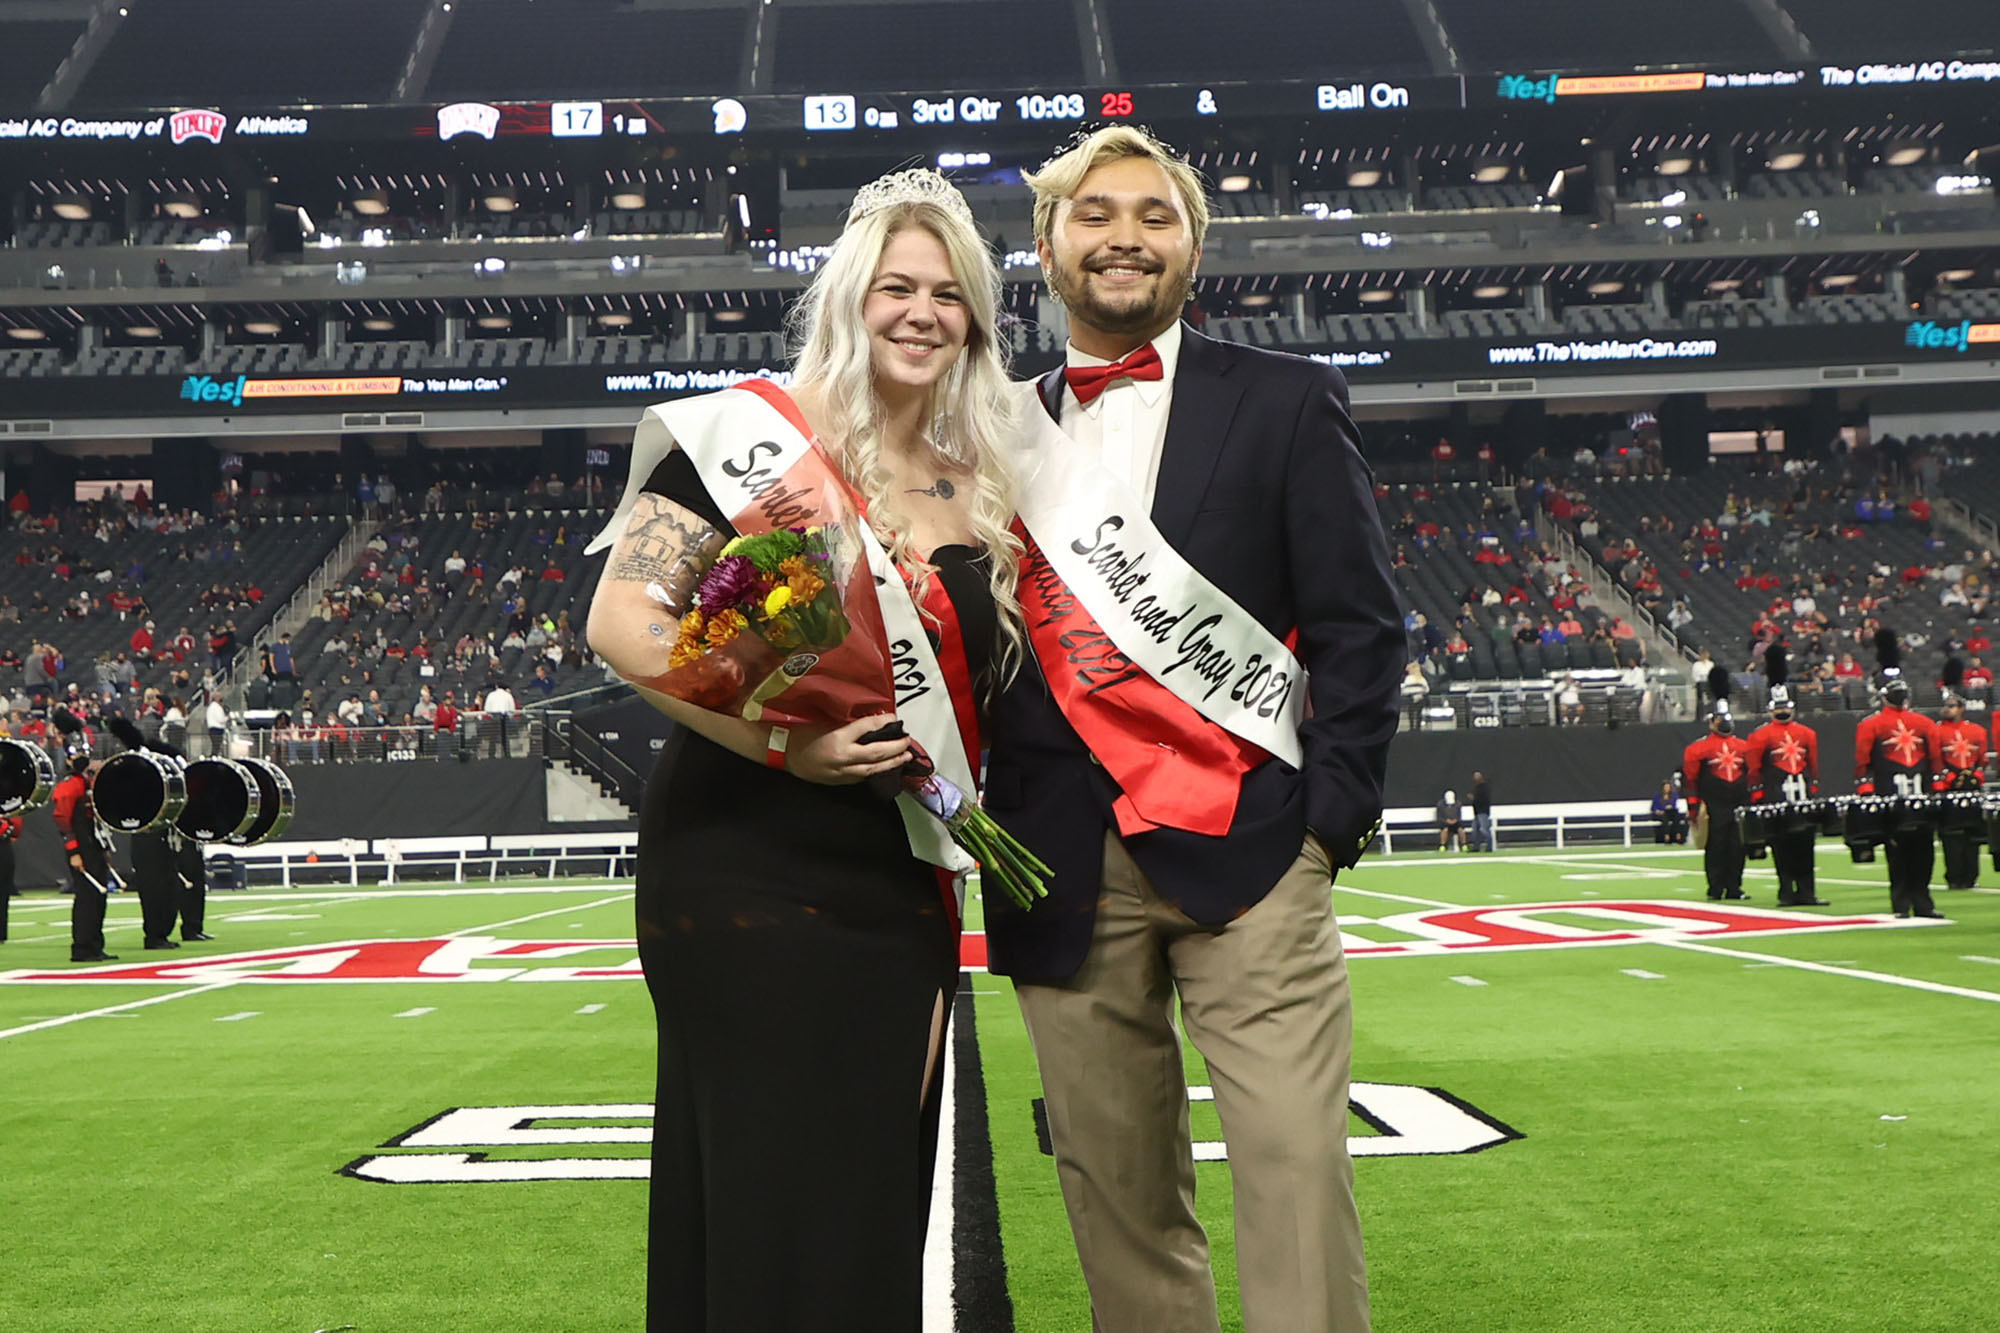 man and woman on football field in formal clothing